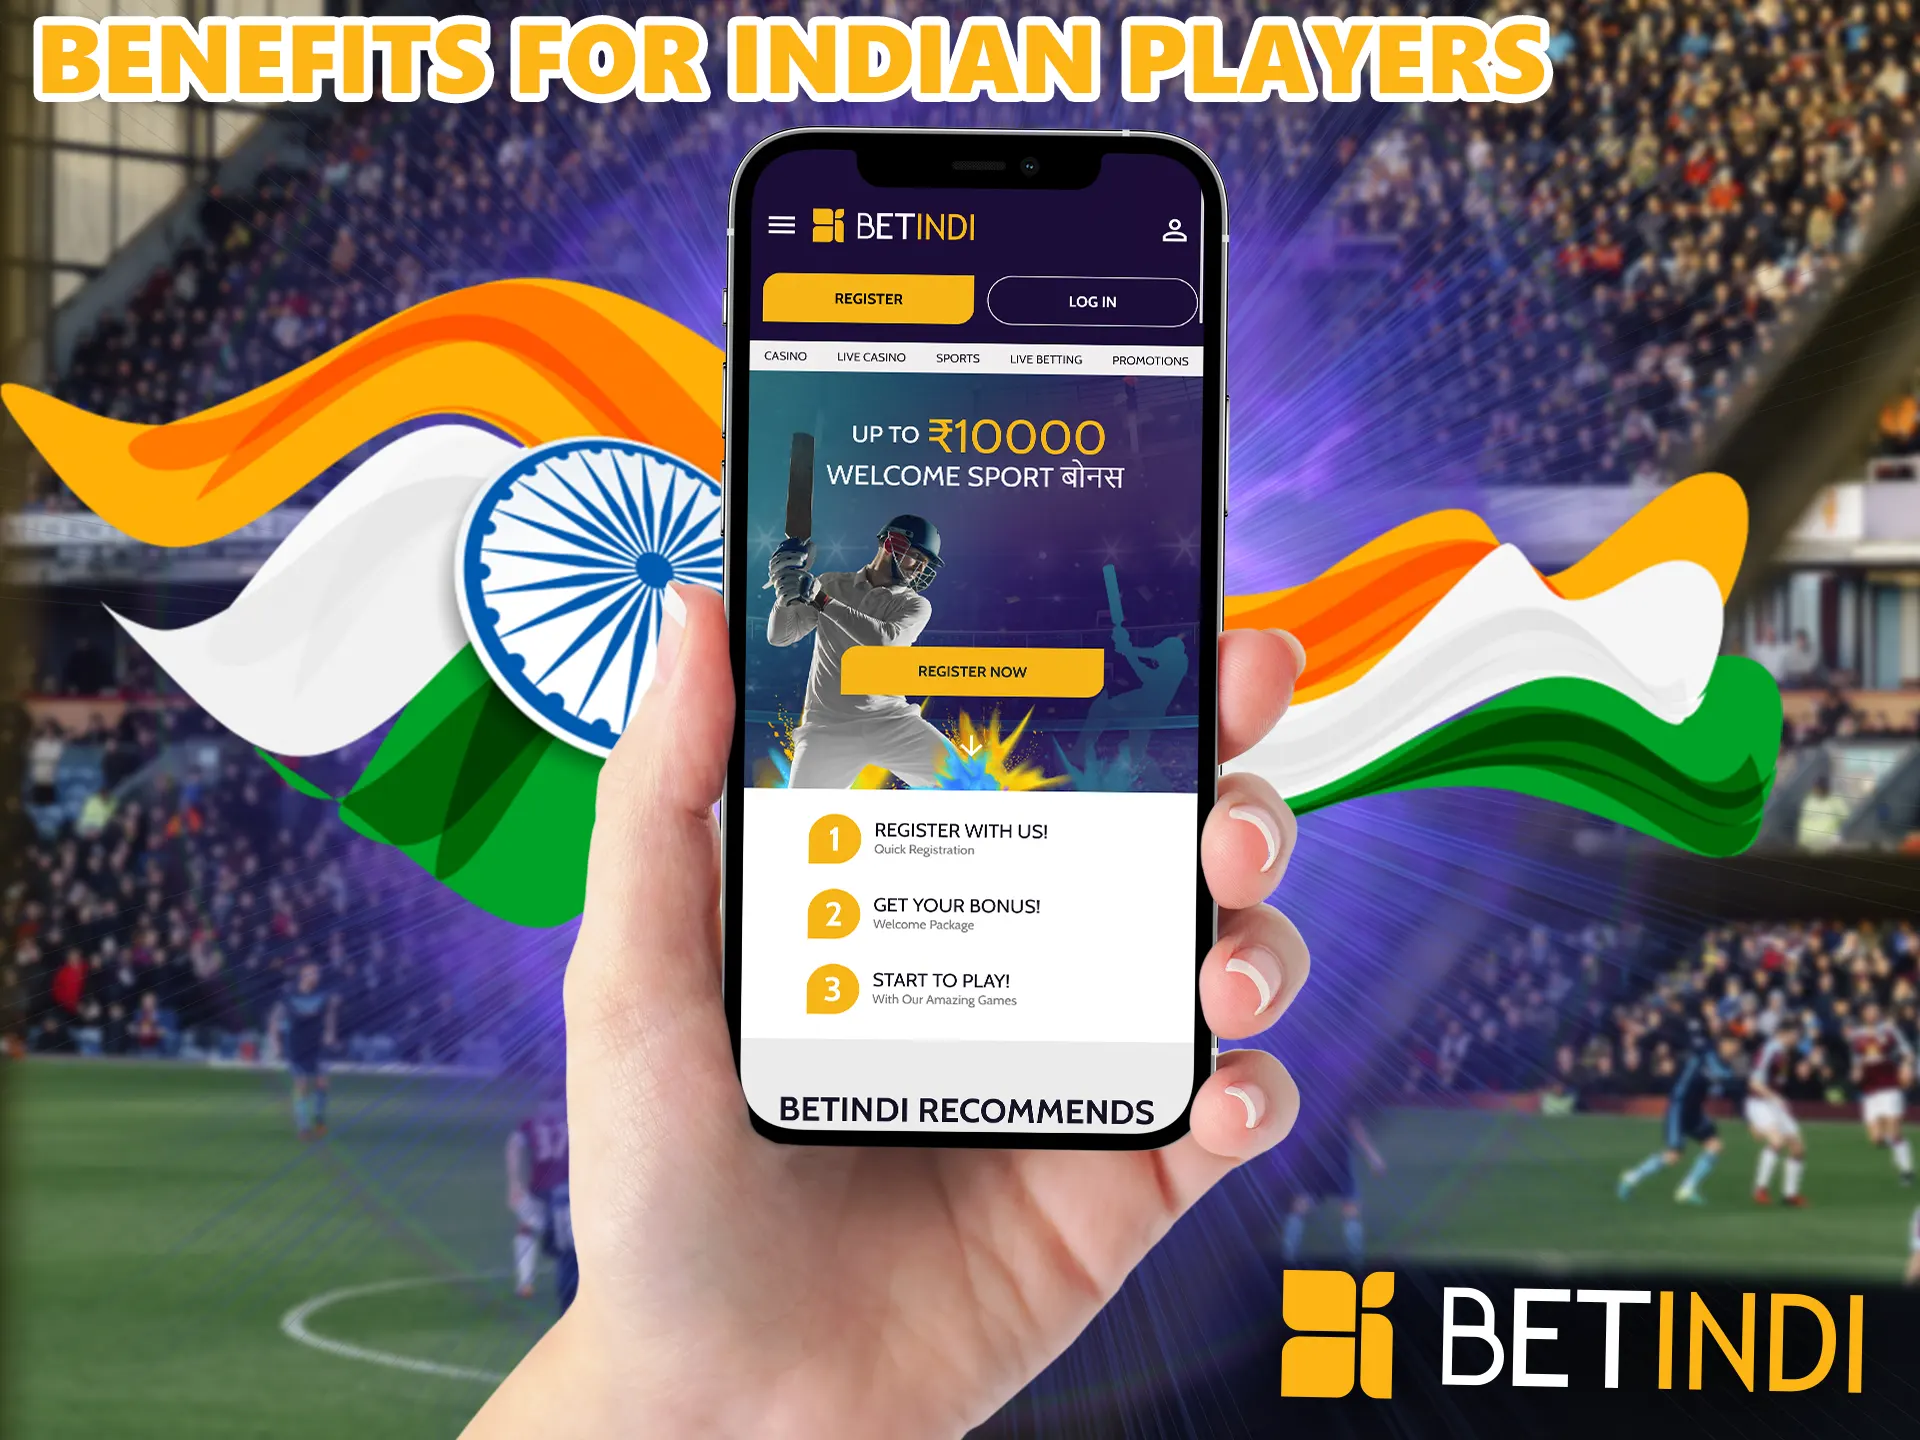 BetIndi bookmaker accepts INR as currency for deposits and withdrawals, this helps users from India to bet comfortably.